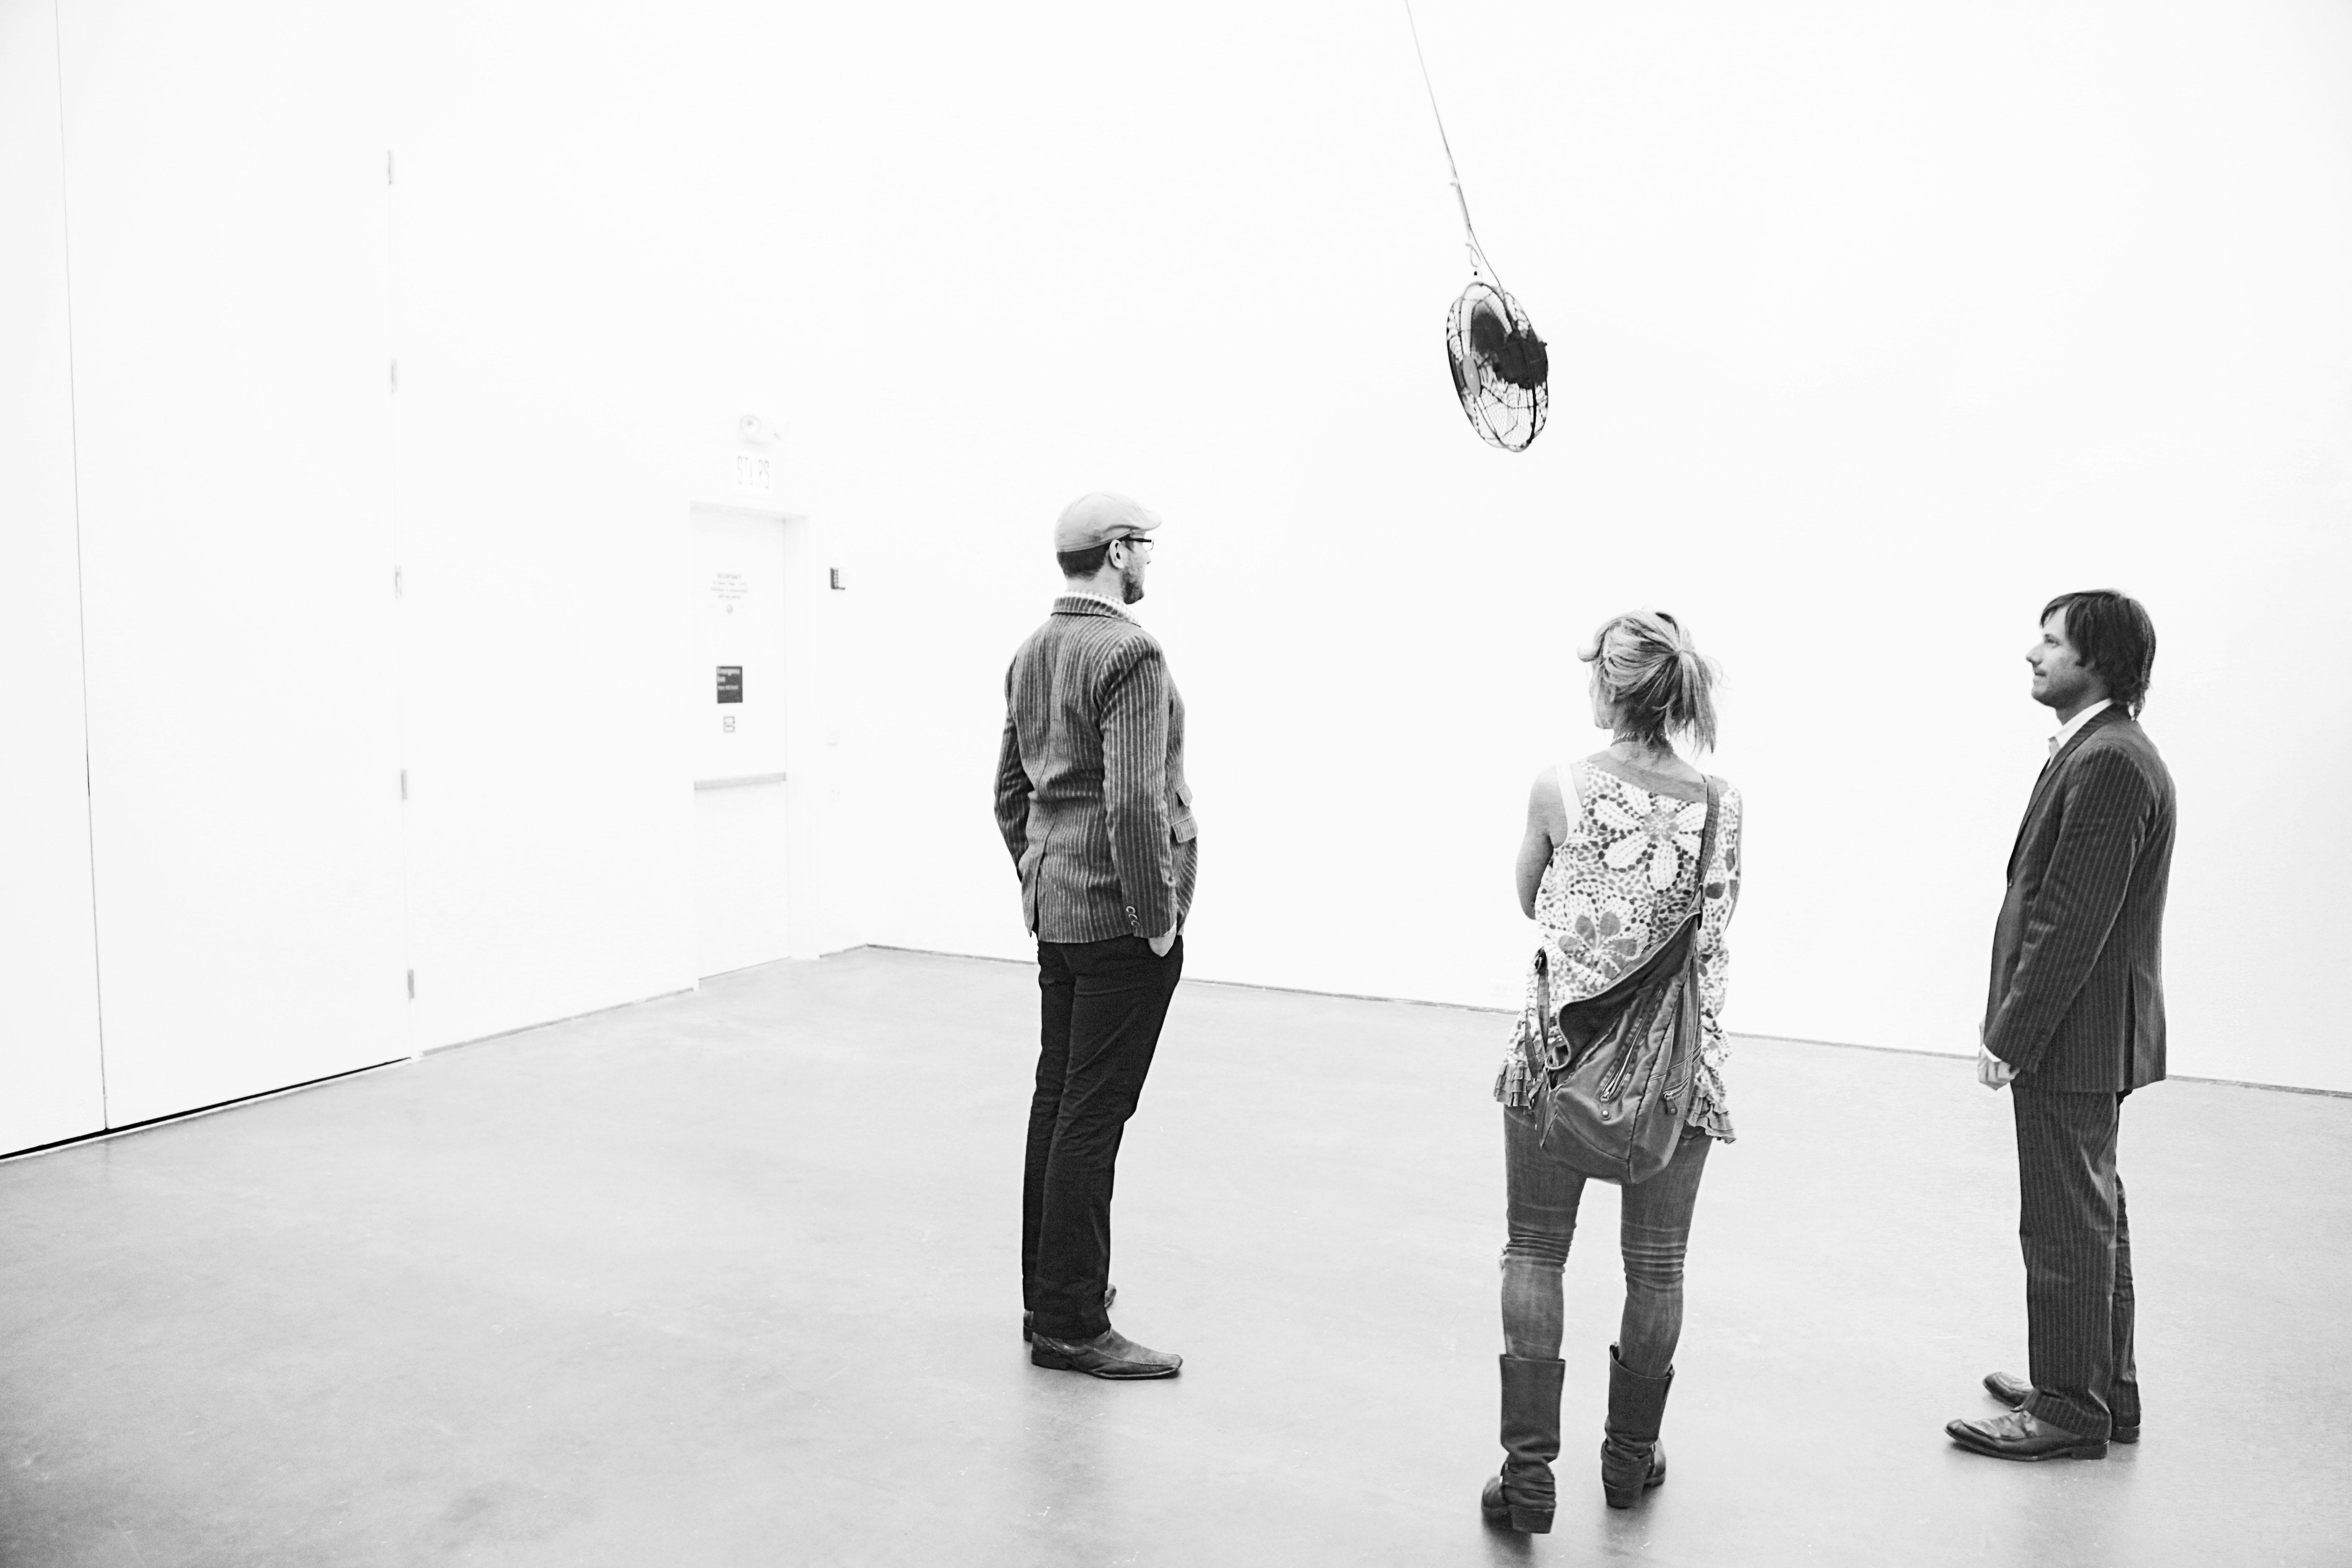 Three people in a black-and-white photograph look at a ceiling fan hanging from the ceiling.